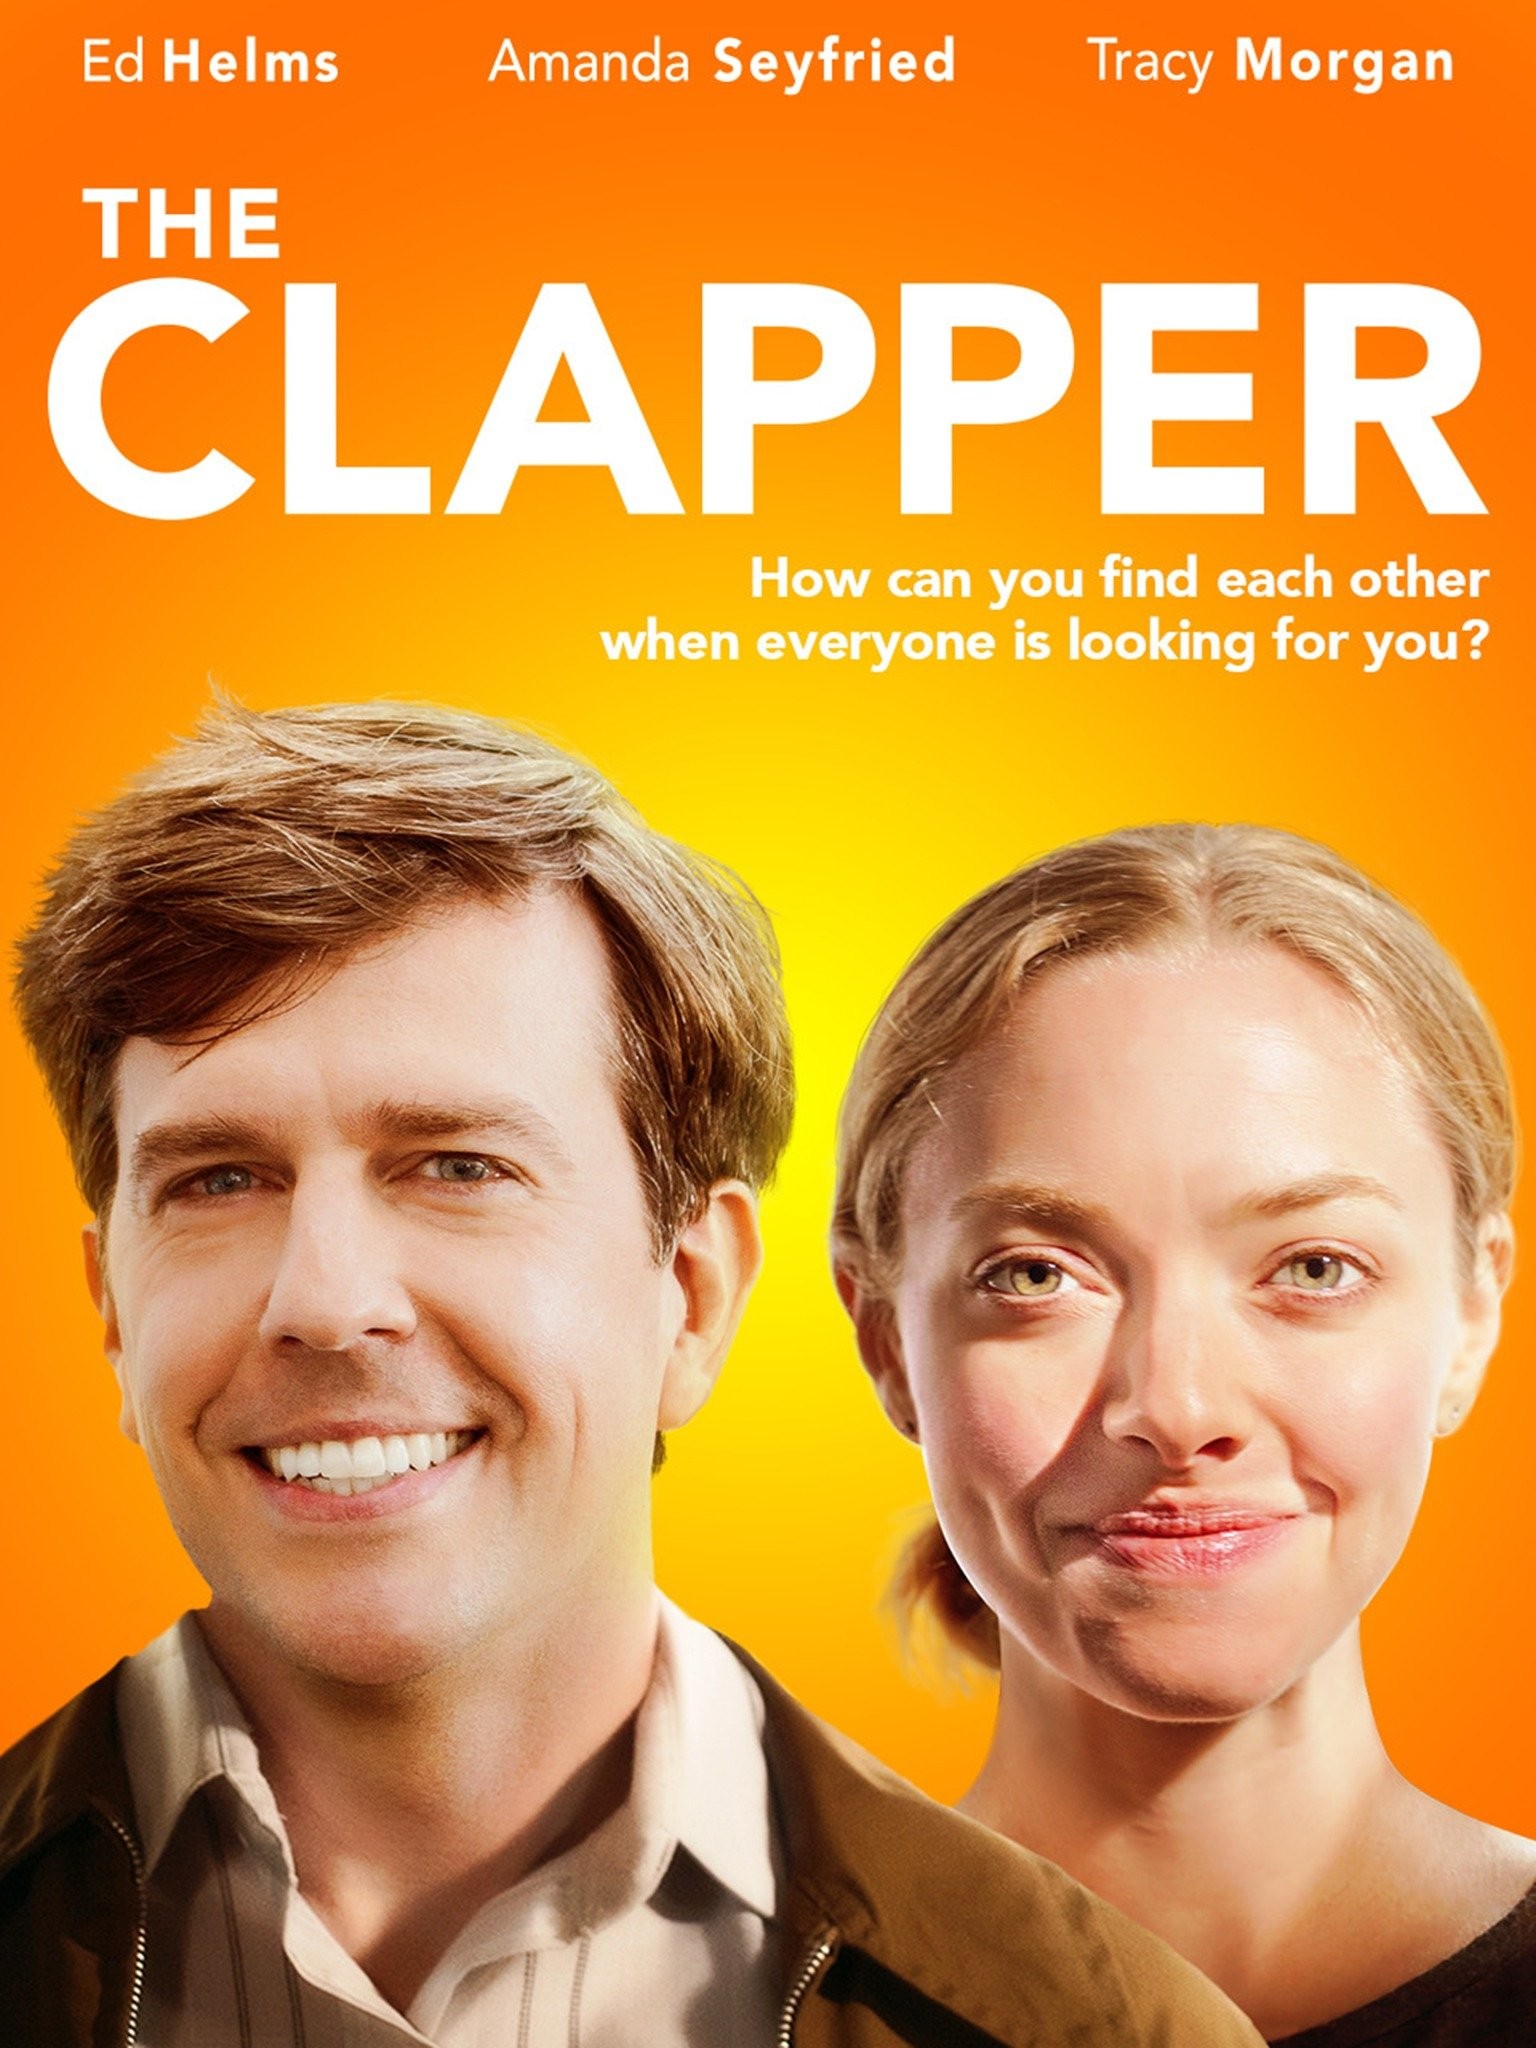 Tracy Morgan in Ed Helms Comedy 'Clapper